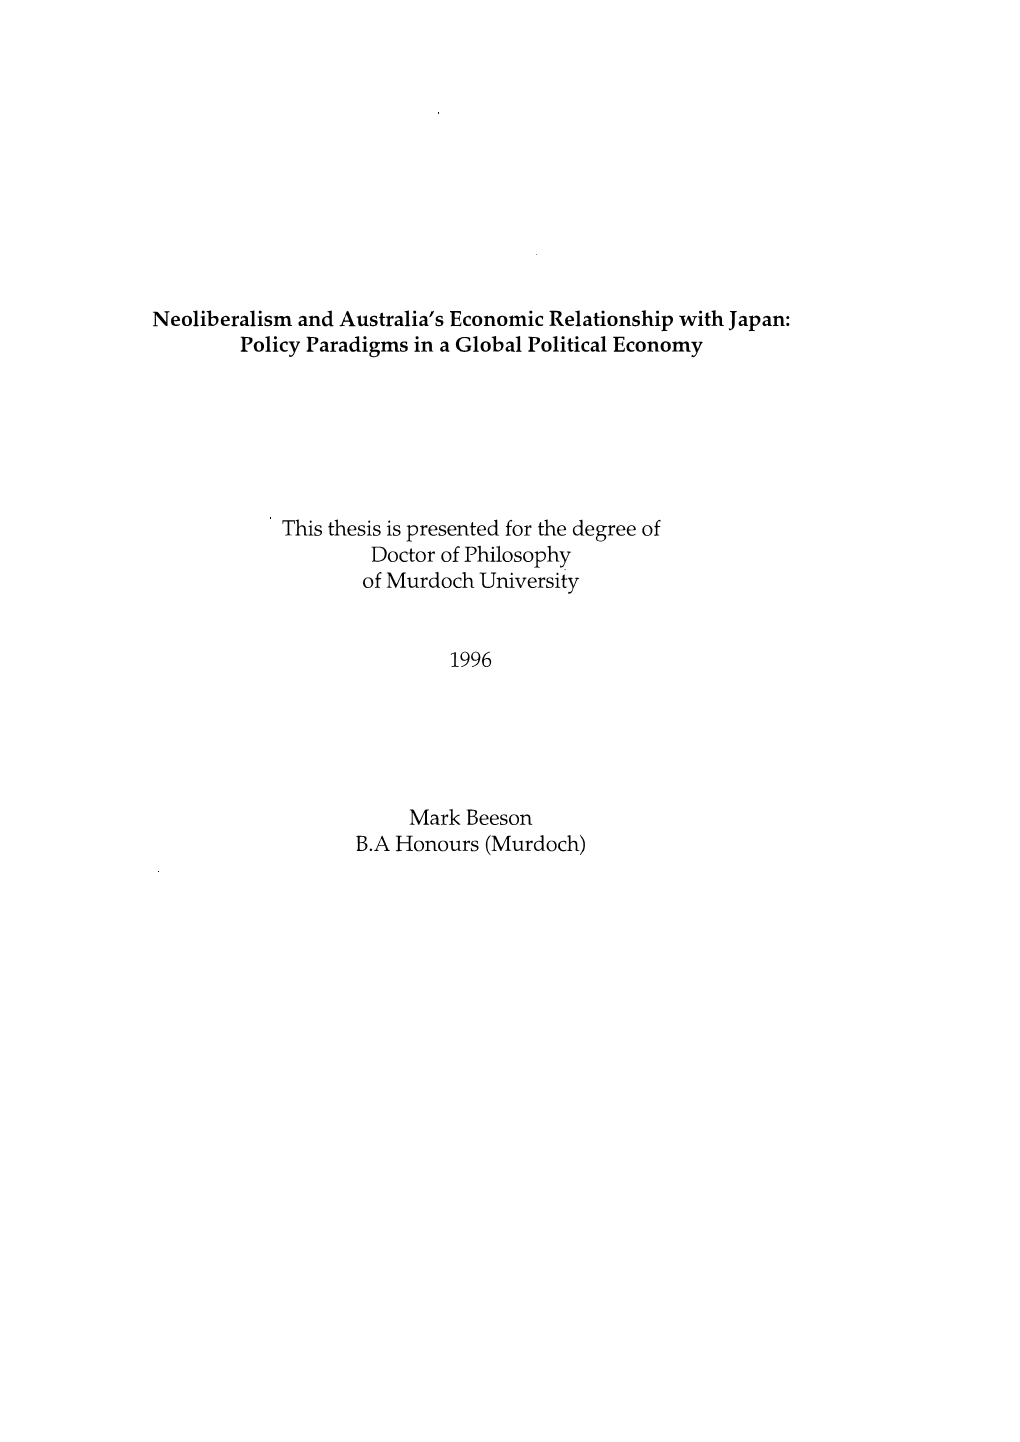 This Thesis Is Presented for the Degree of Doctor of Philosophy of Murdoch University